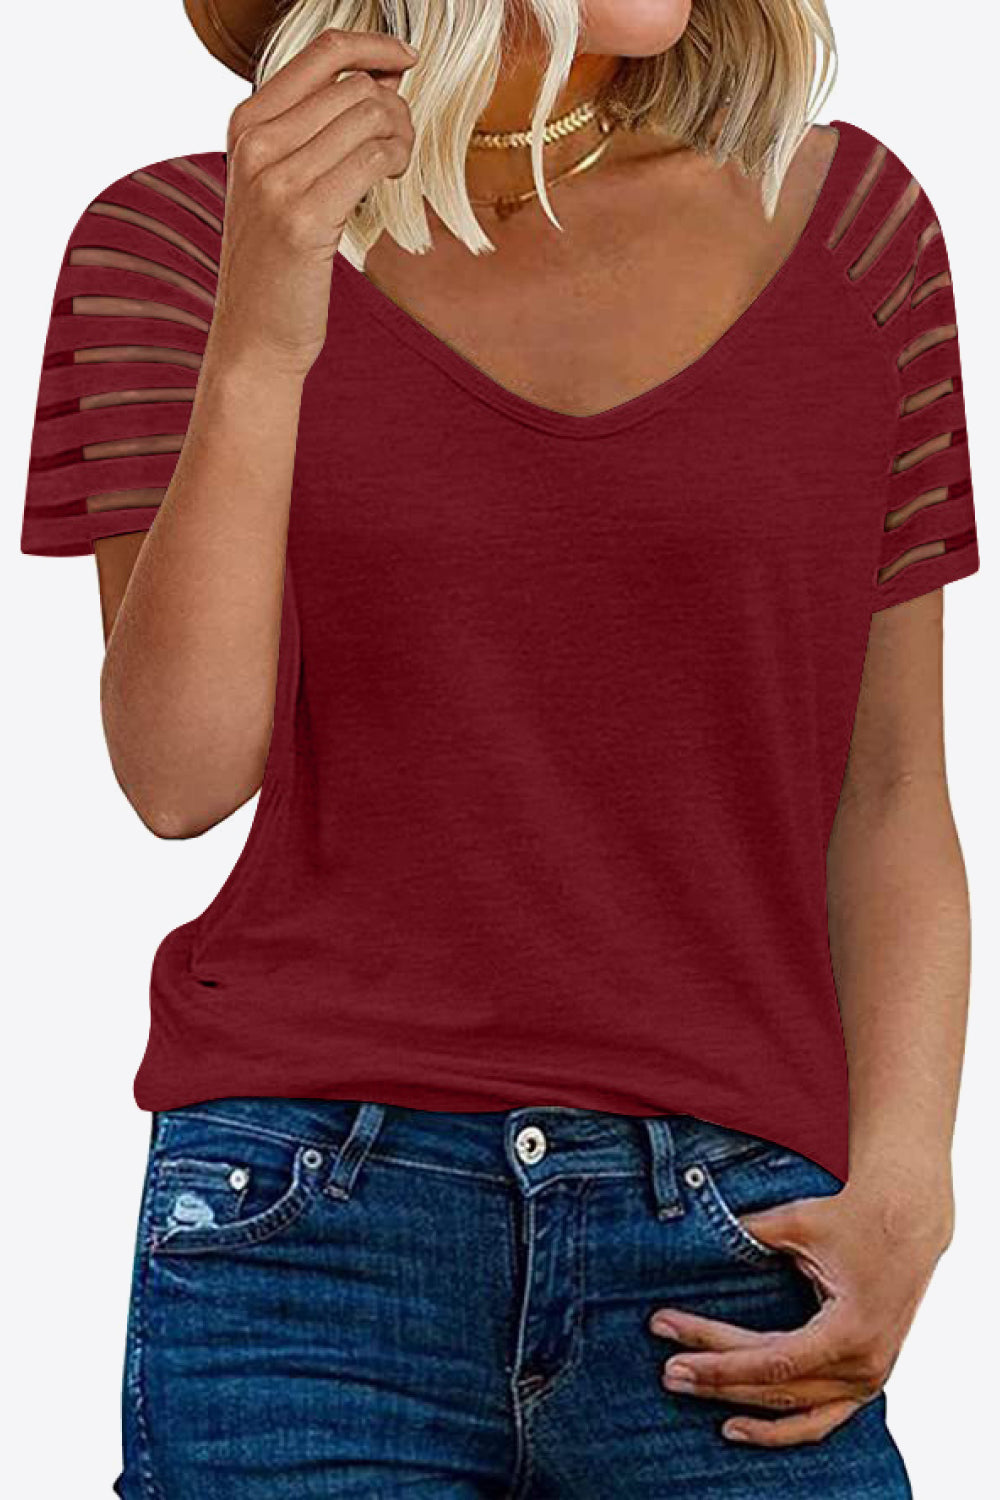 Red Burgundy Wine Womens Sheer Striped Sleeve Tee in 8 colors, Very Highly Stretchy Rayon Spandex Blend Fabric Material, True to Size Fit, Shortsleeve Tee, V-Neckline